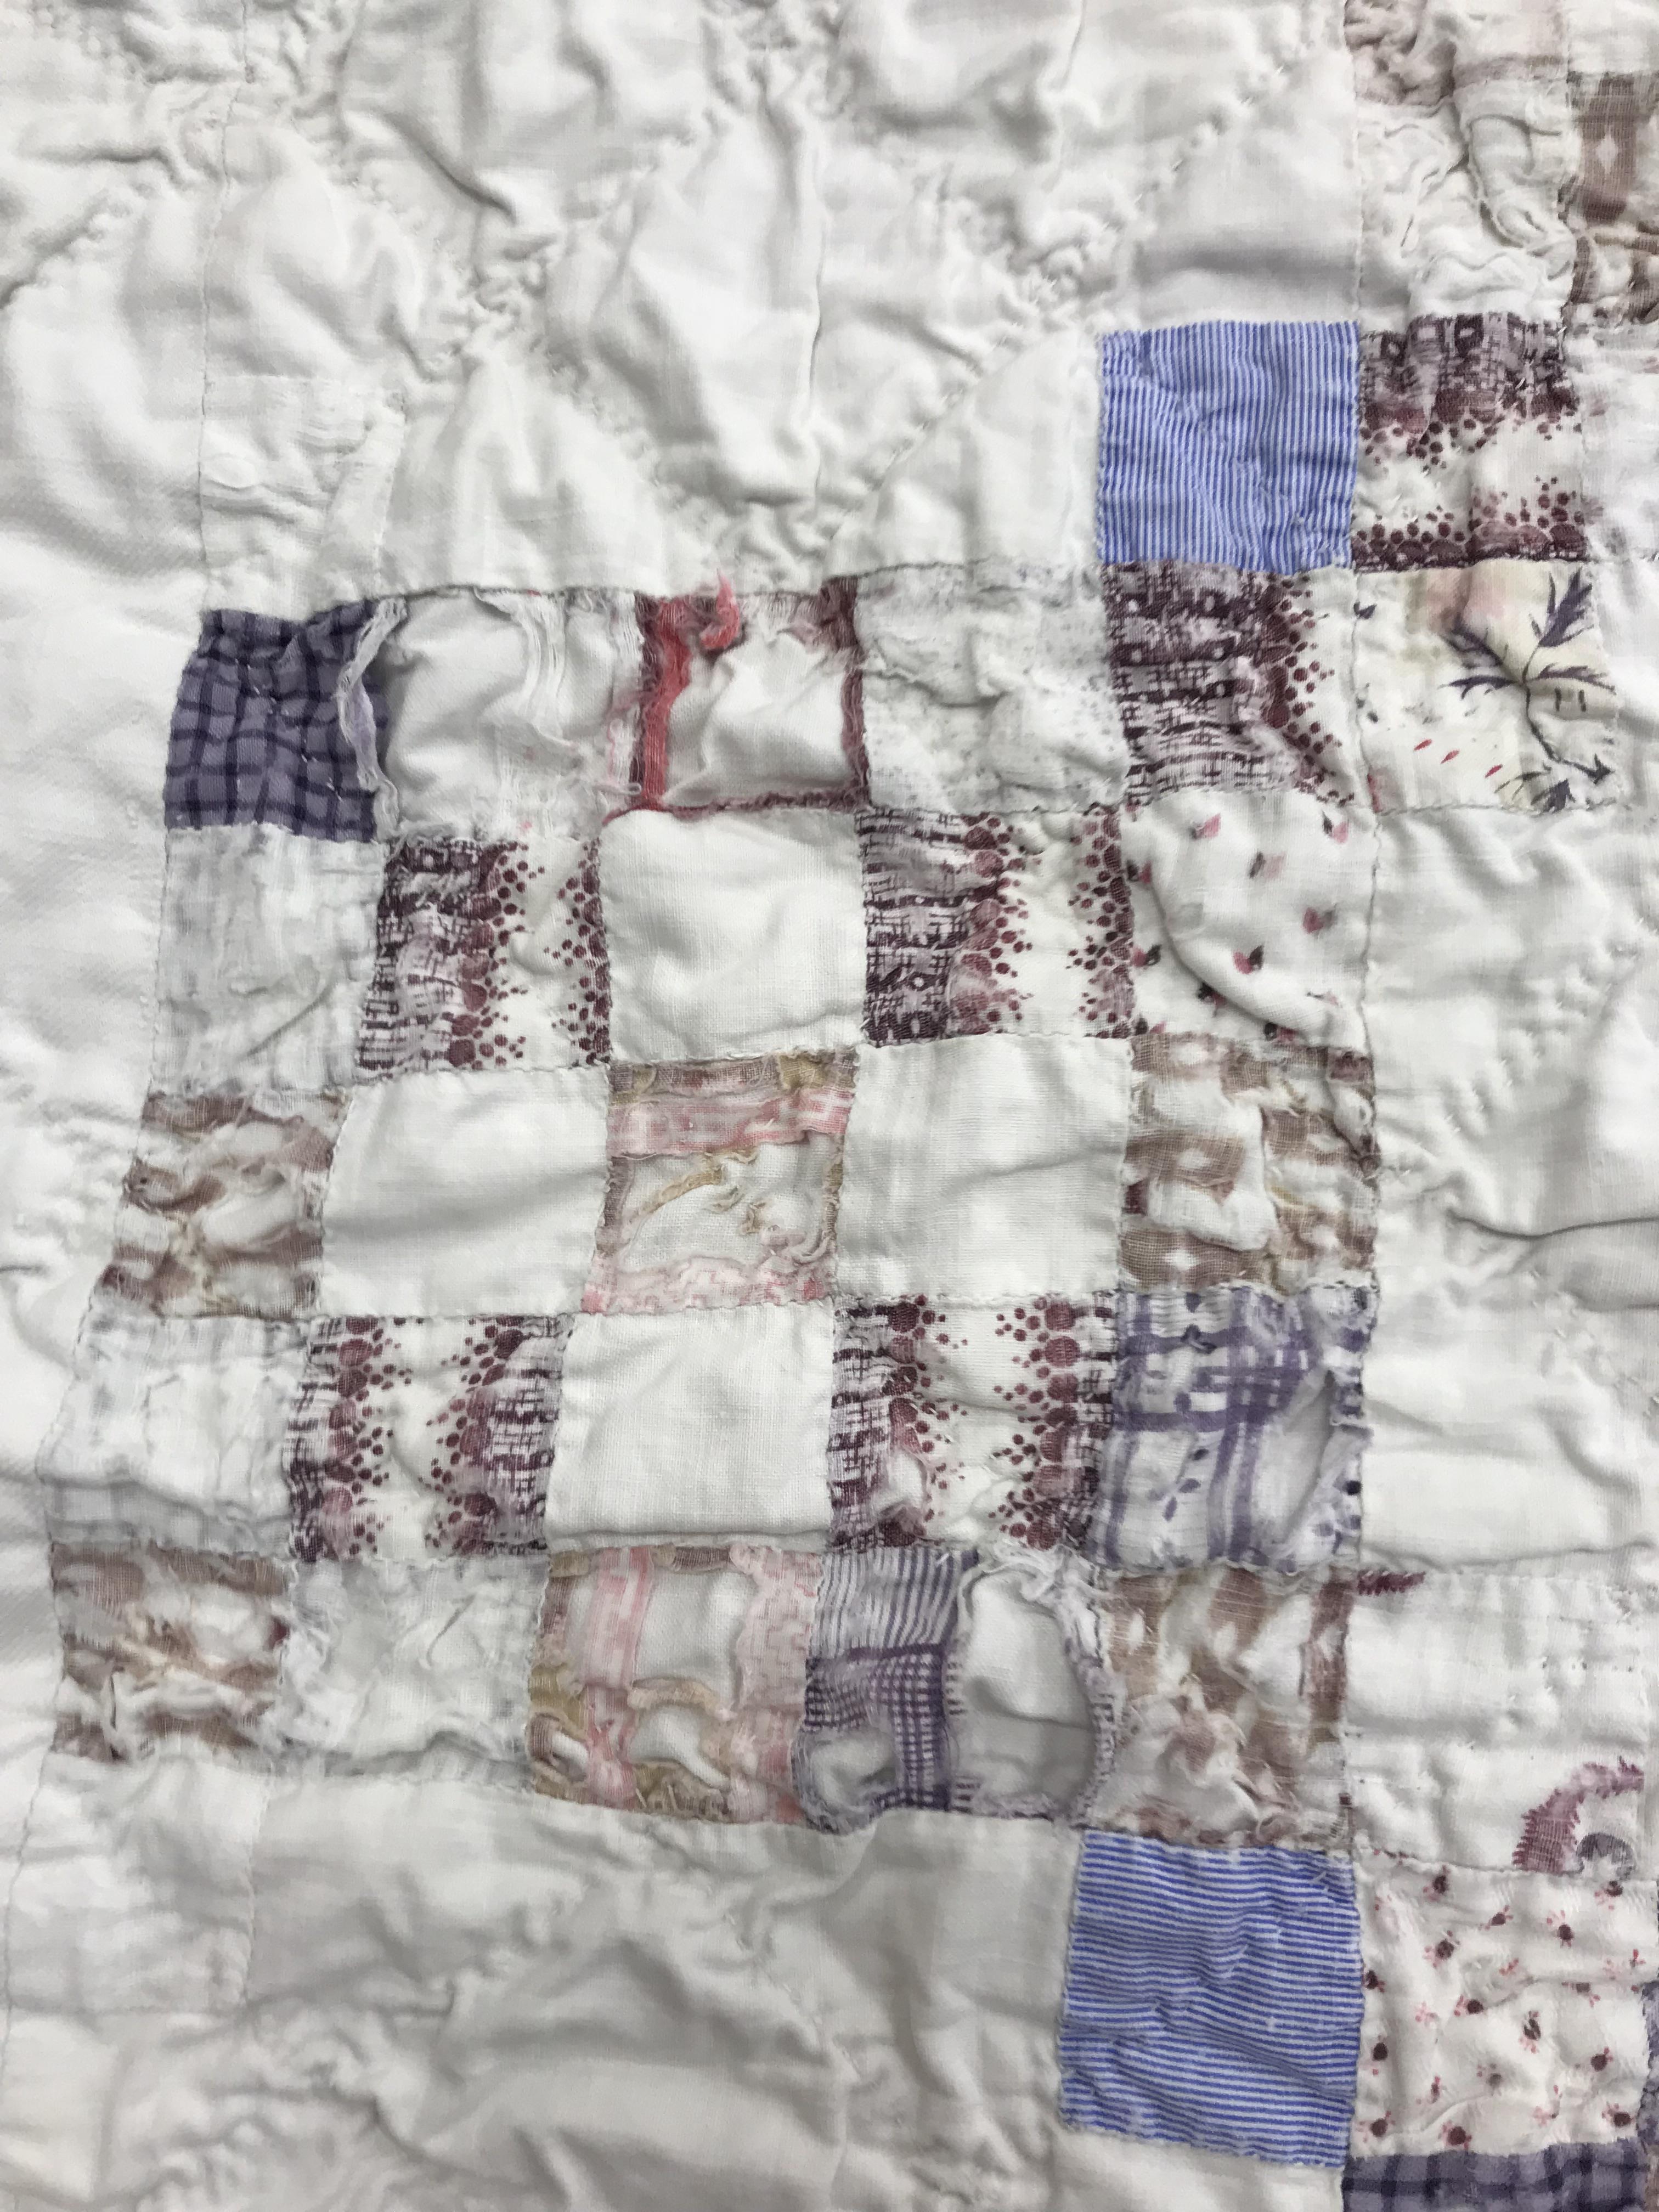 Three circa 1900 quilts comprising one hand-stitched patchwork quilt with white ground and - Image 5 of 28